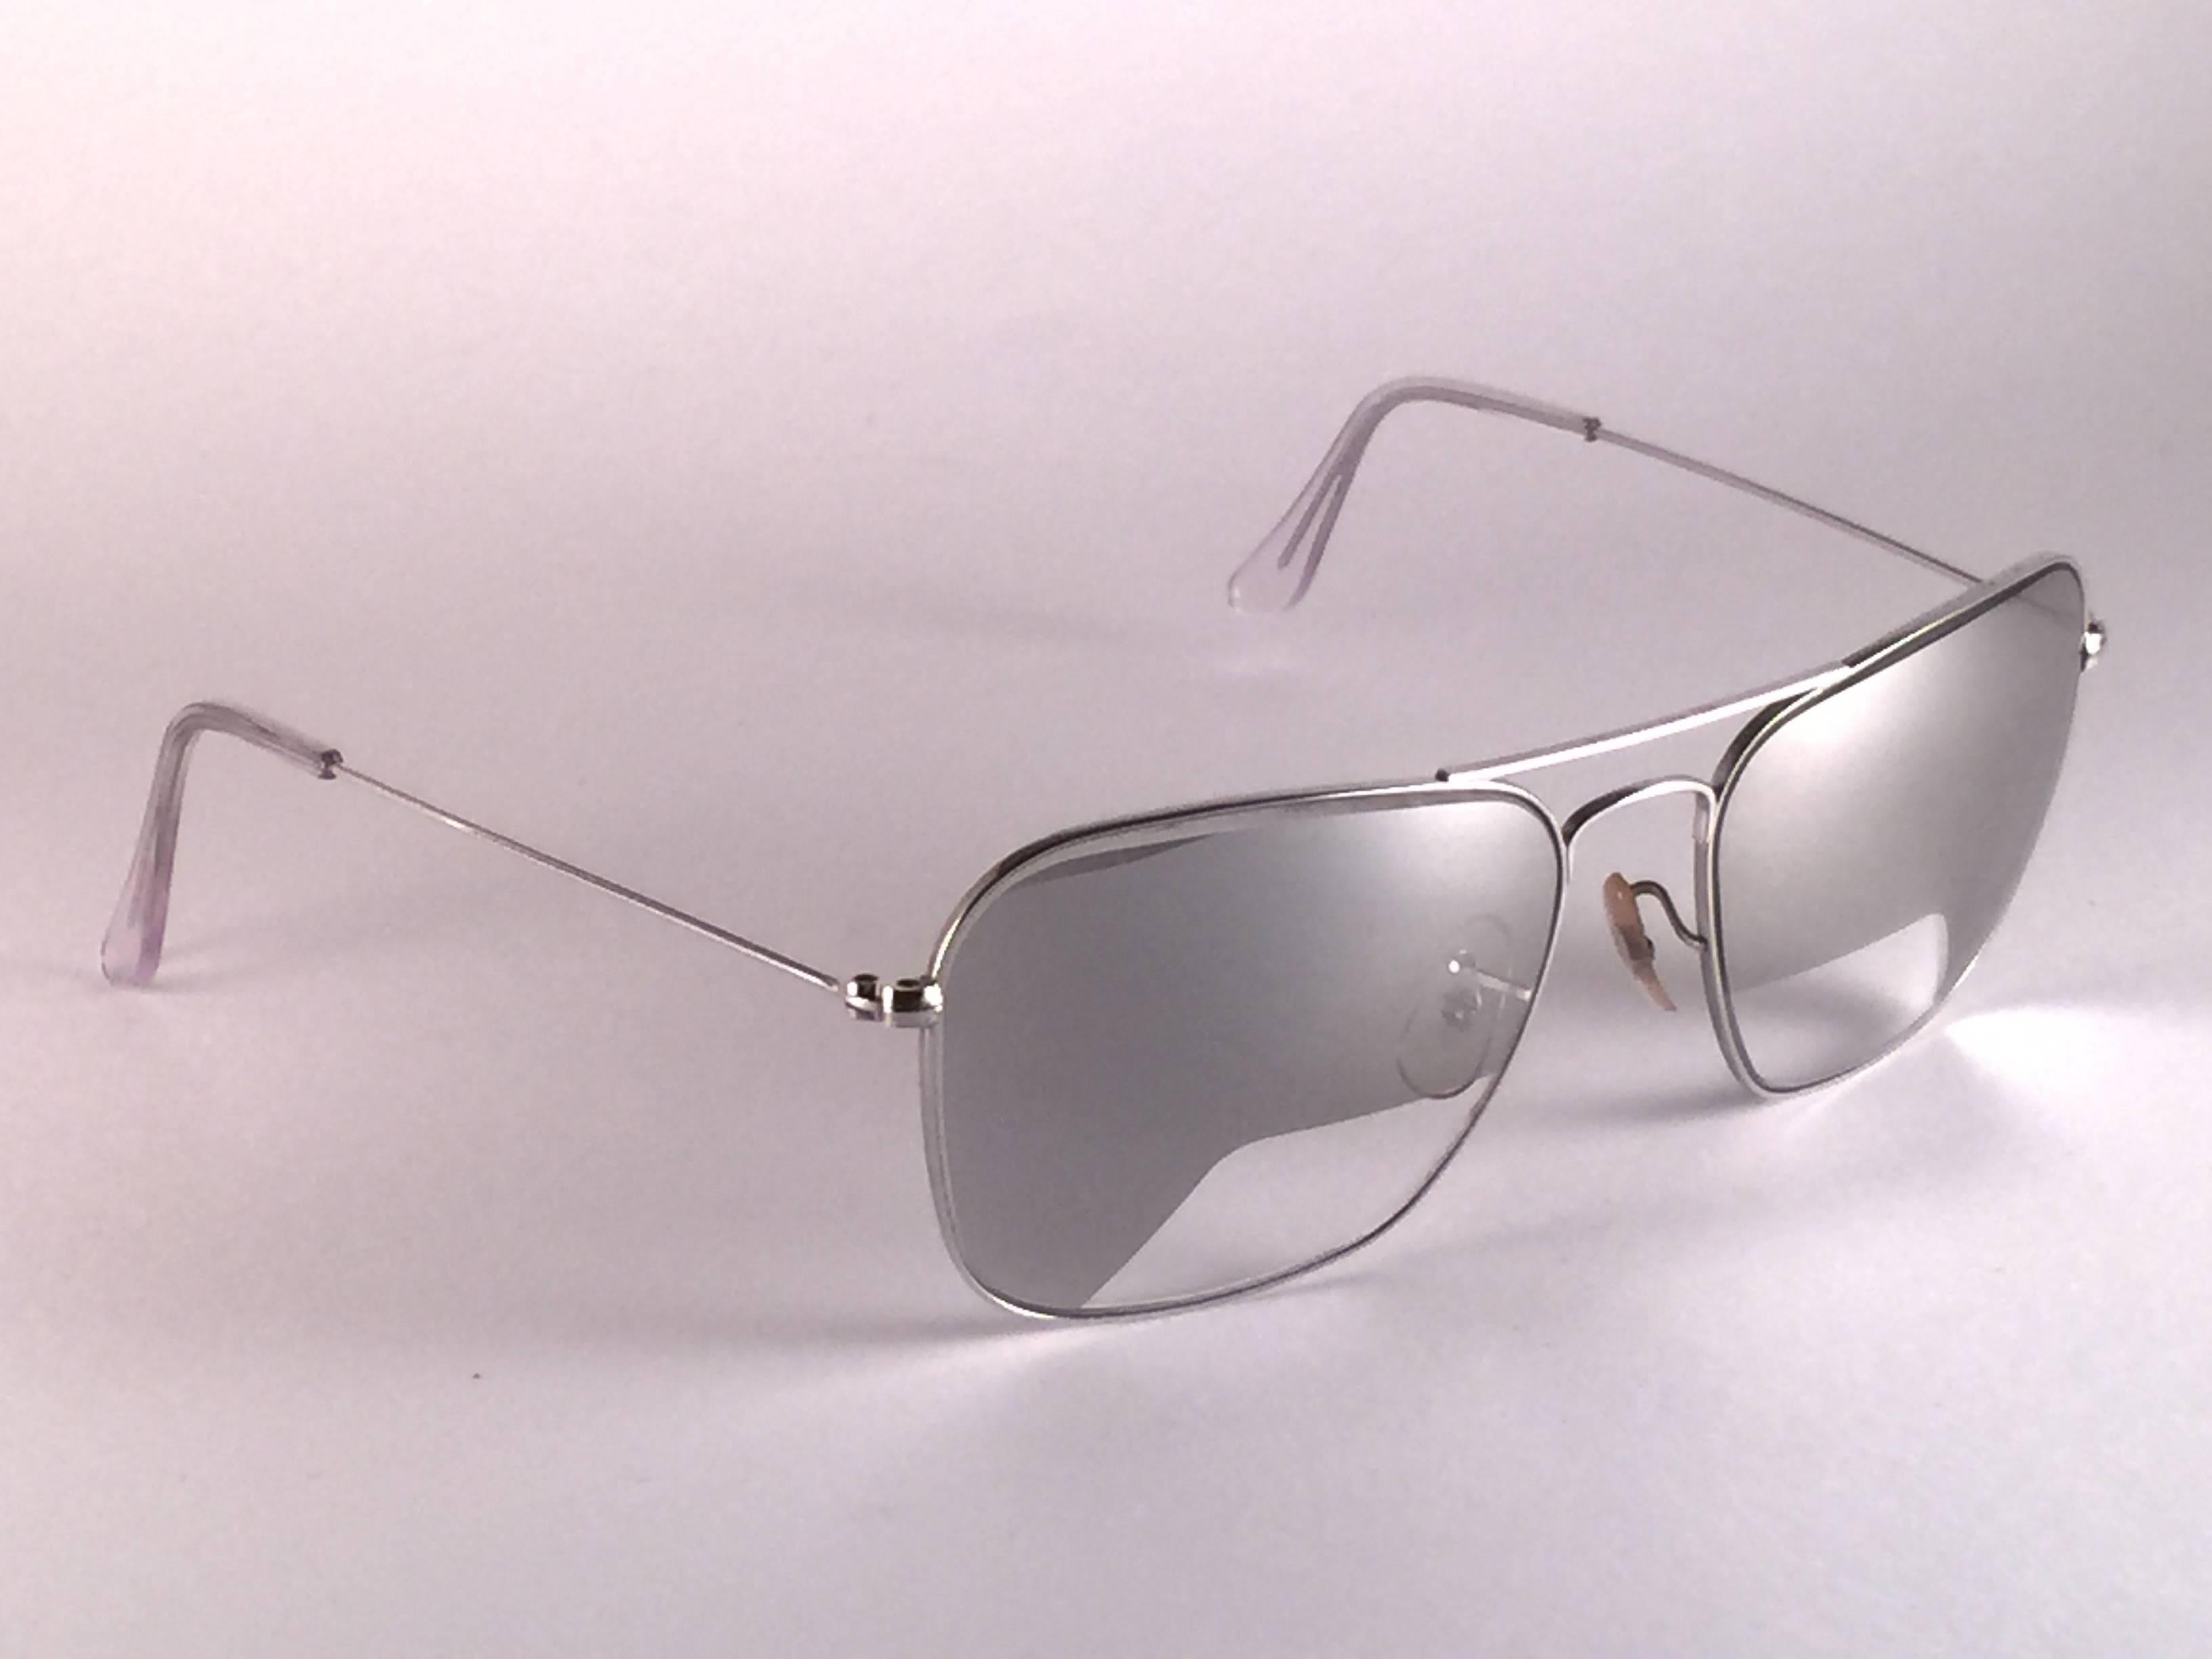 New Ultra Rare Vintage Ray Ban Caravan 10K White Gold in 58MM size. 
Lenses are super rare mirror with special lenses especially crafted for airline pilots to have a clear view over the instruments. B&L etched in the lenses, so mid 1970's. 